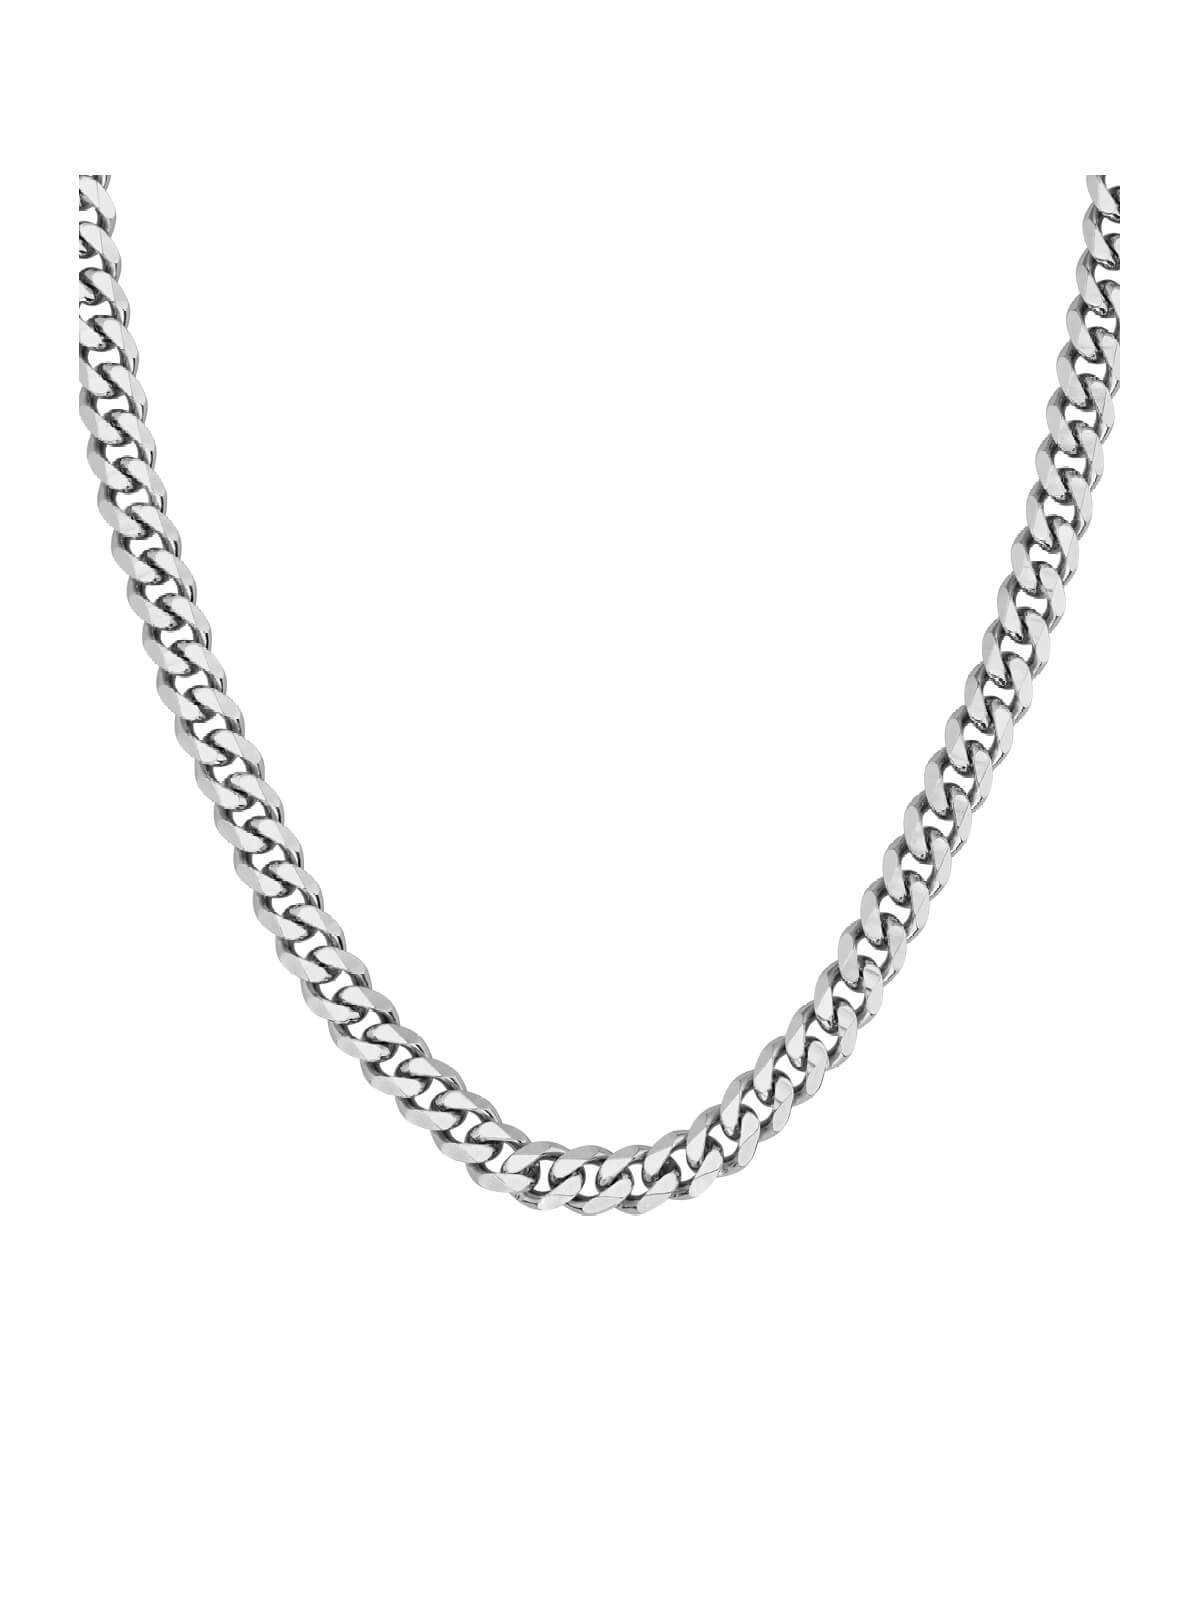 BOSS Chain Link Necklace in Stainless Steel 1580142